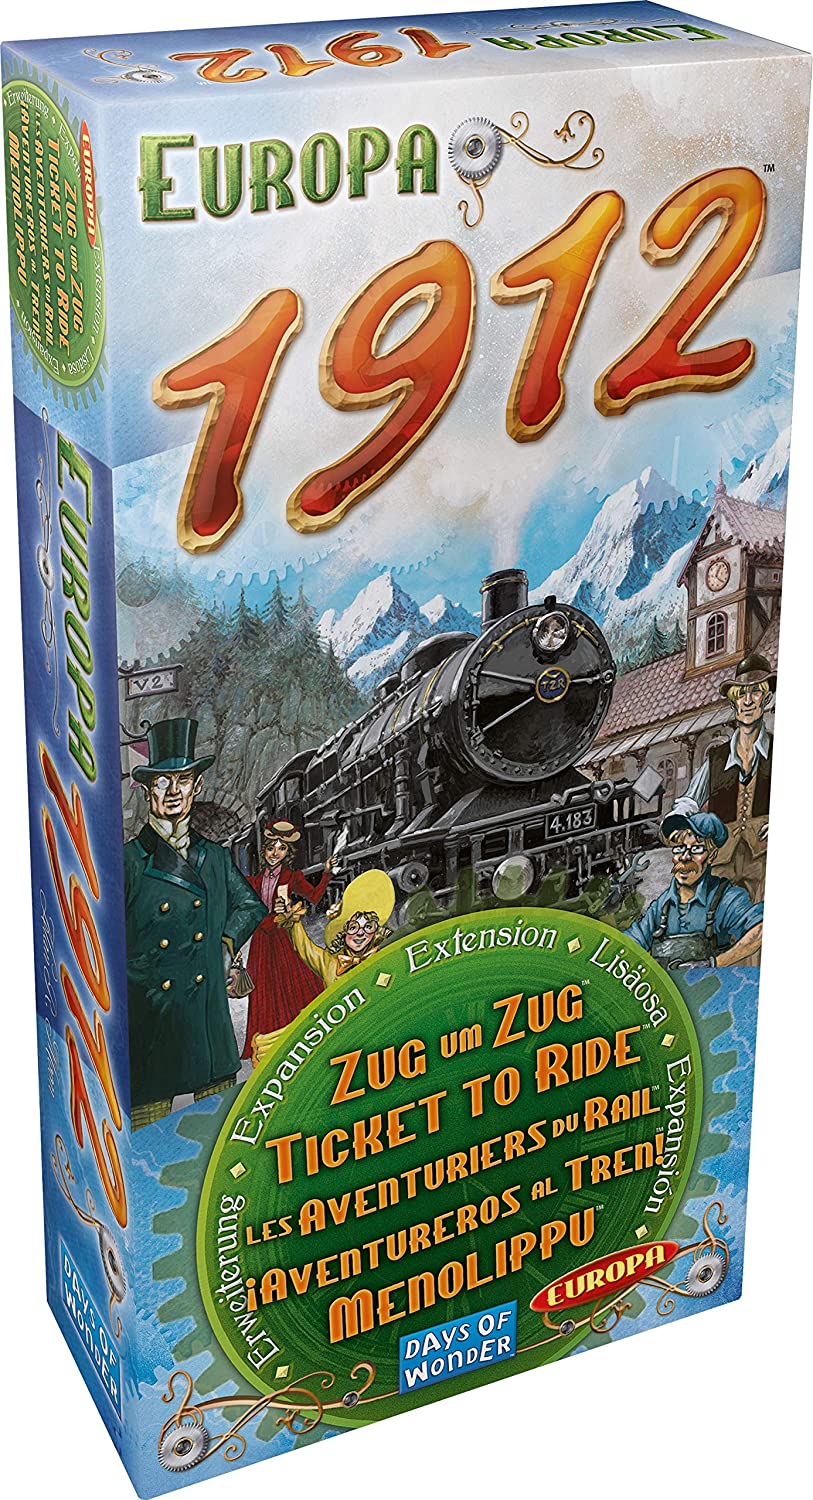 Ticket to Ride: Europa - 1912 Expansion